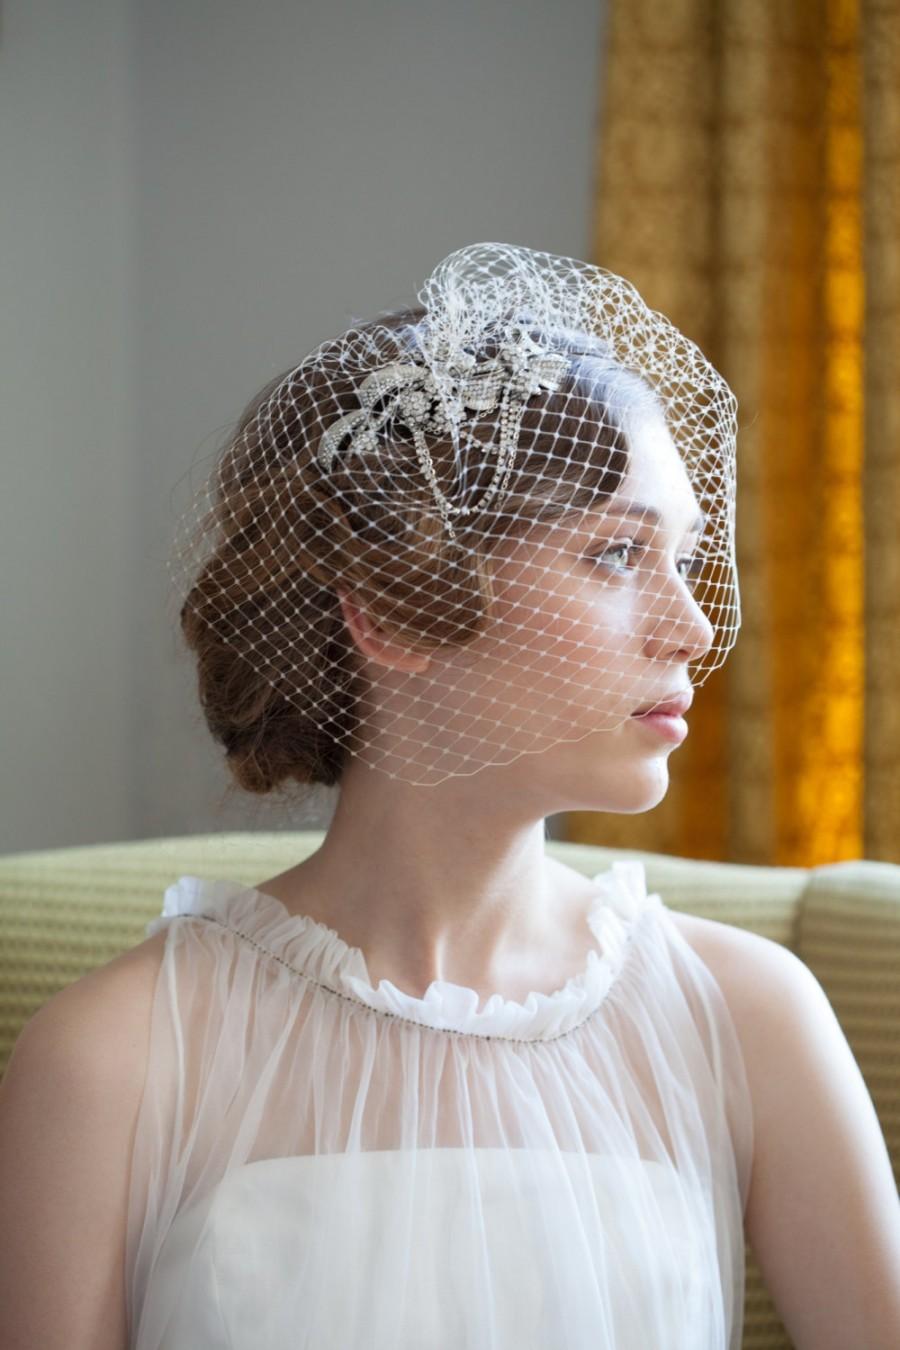 Mariage - Wedding Birdcage veil and side headpiece set - crystal hair accessory - Bridal Veil in ivory, white, or black veil - 1940s, 1950s style veil